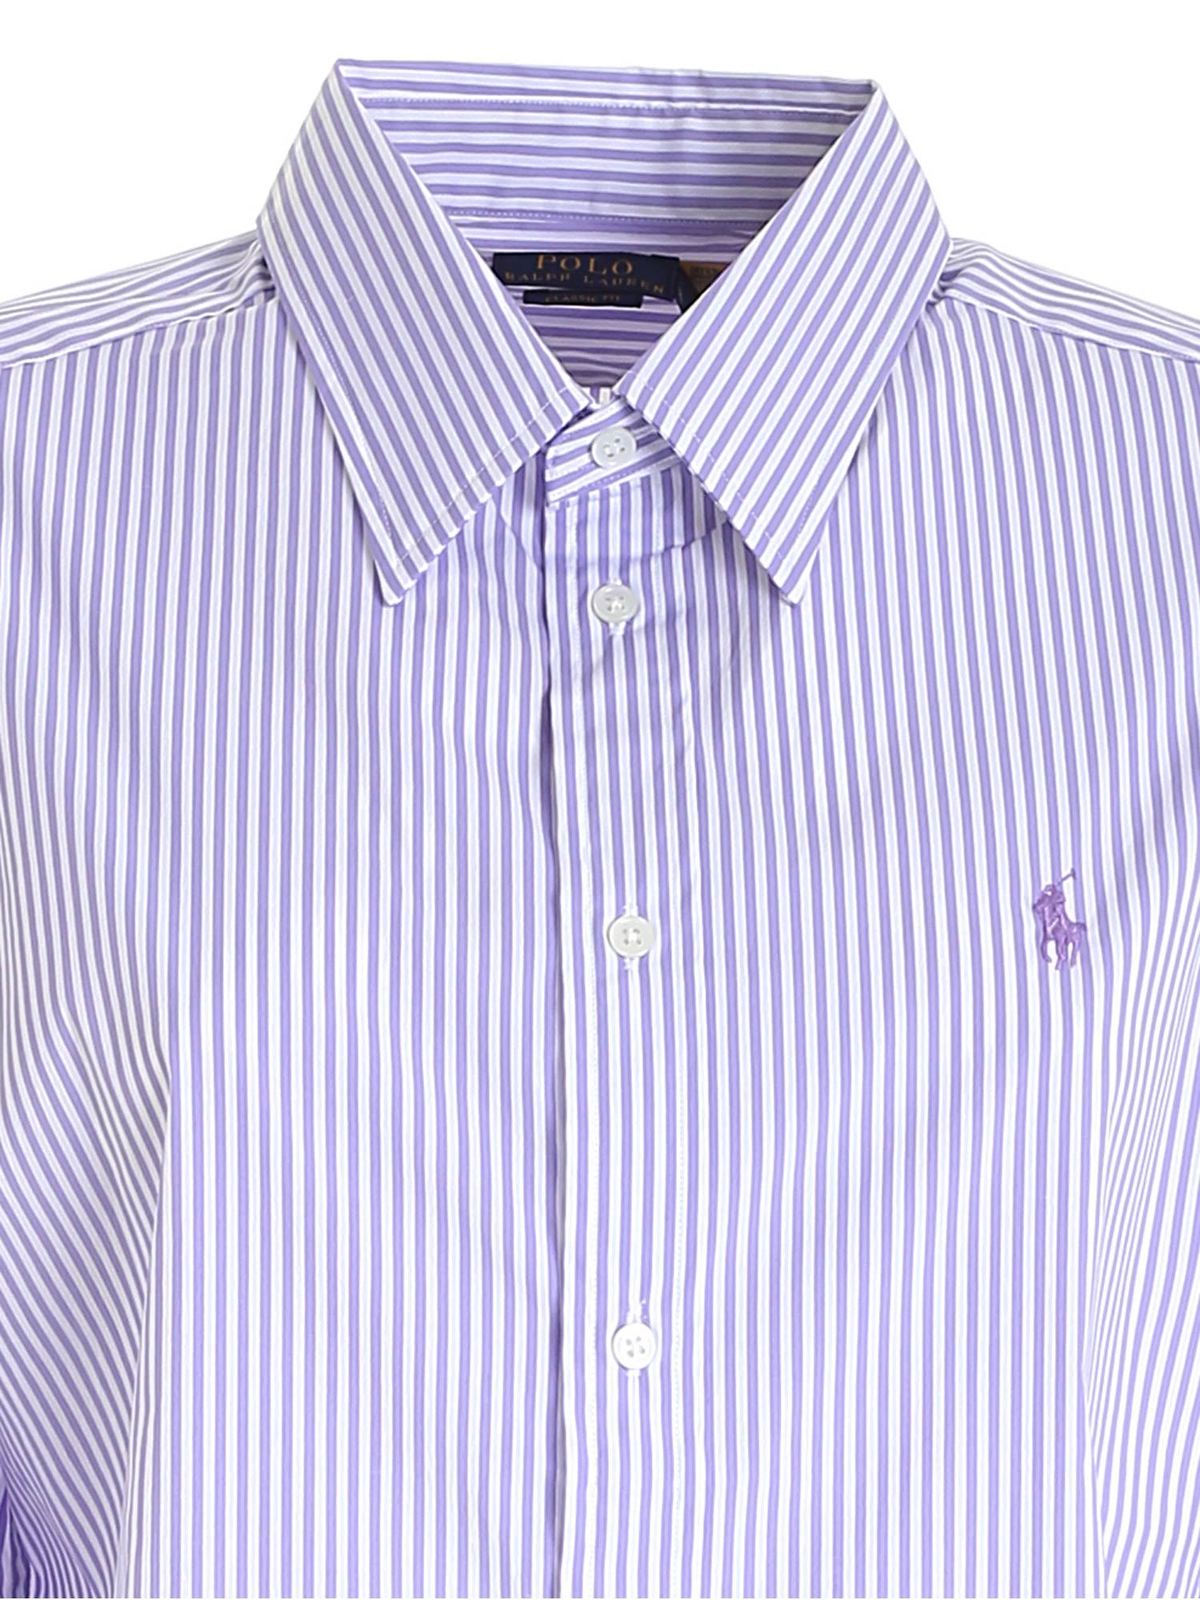 Shirts Polo Ralph Lauren - Striped pattern shirt in purple and white -  211780676005